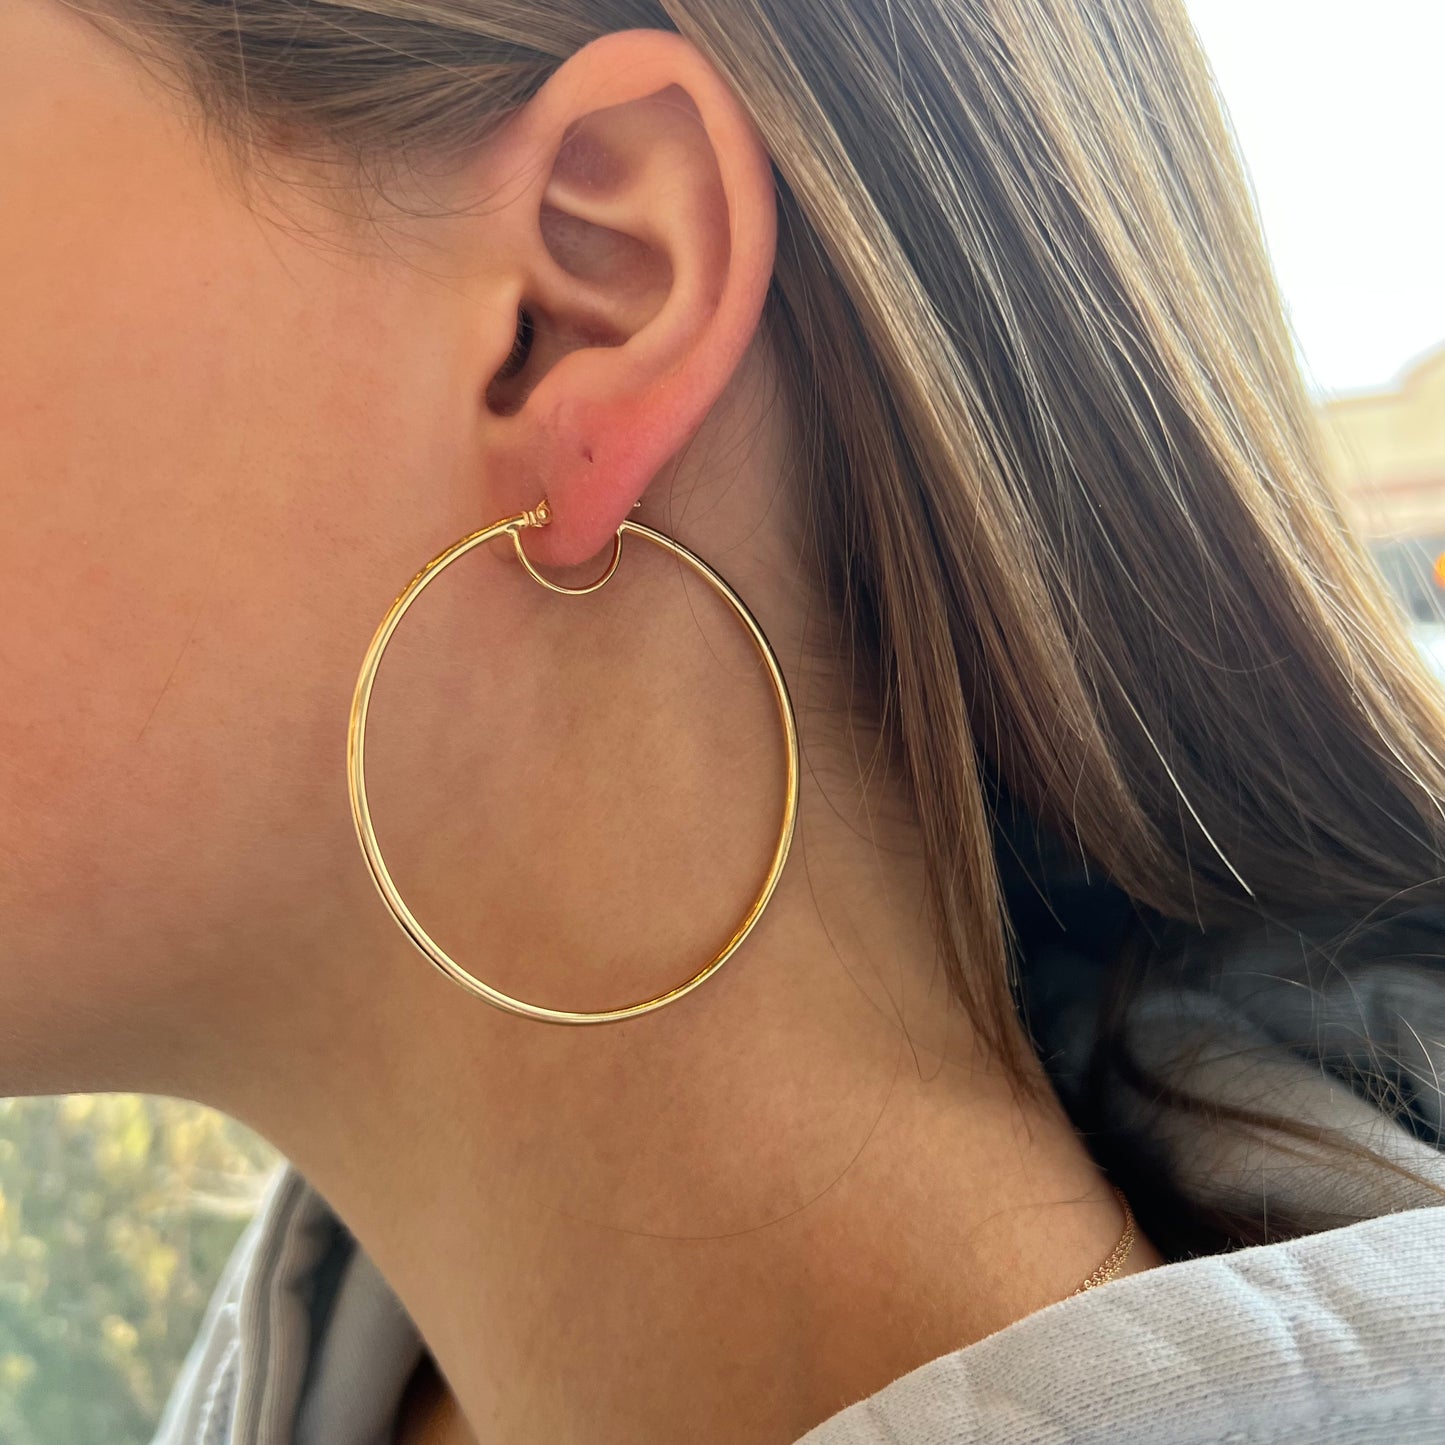 XX-Large 2 mm x 59 mm Gold Hoops